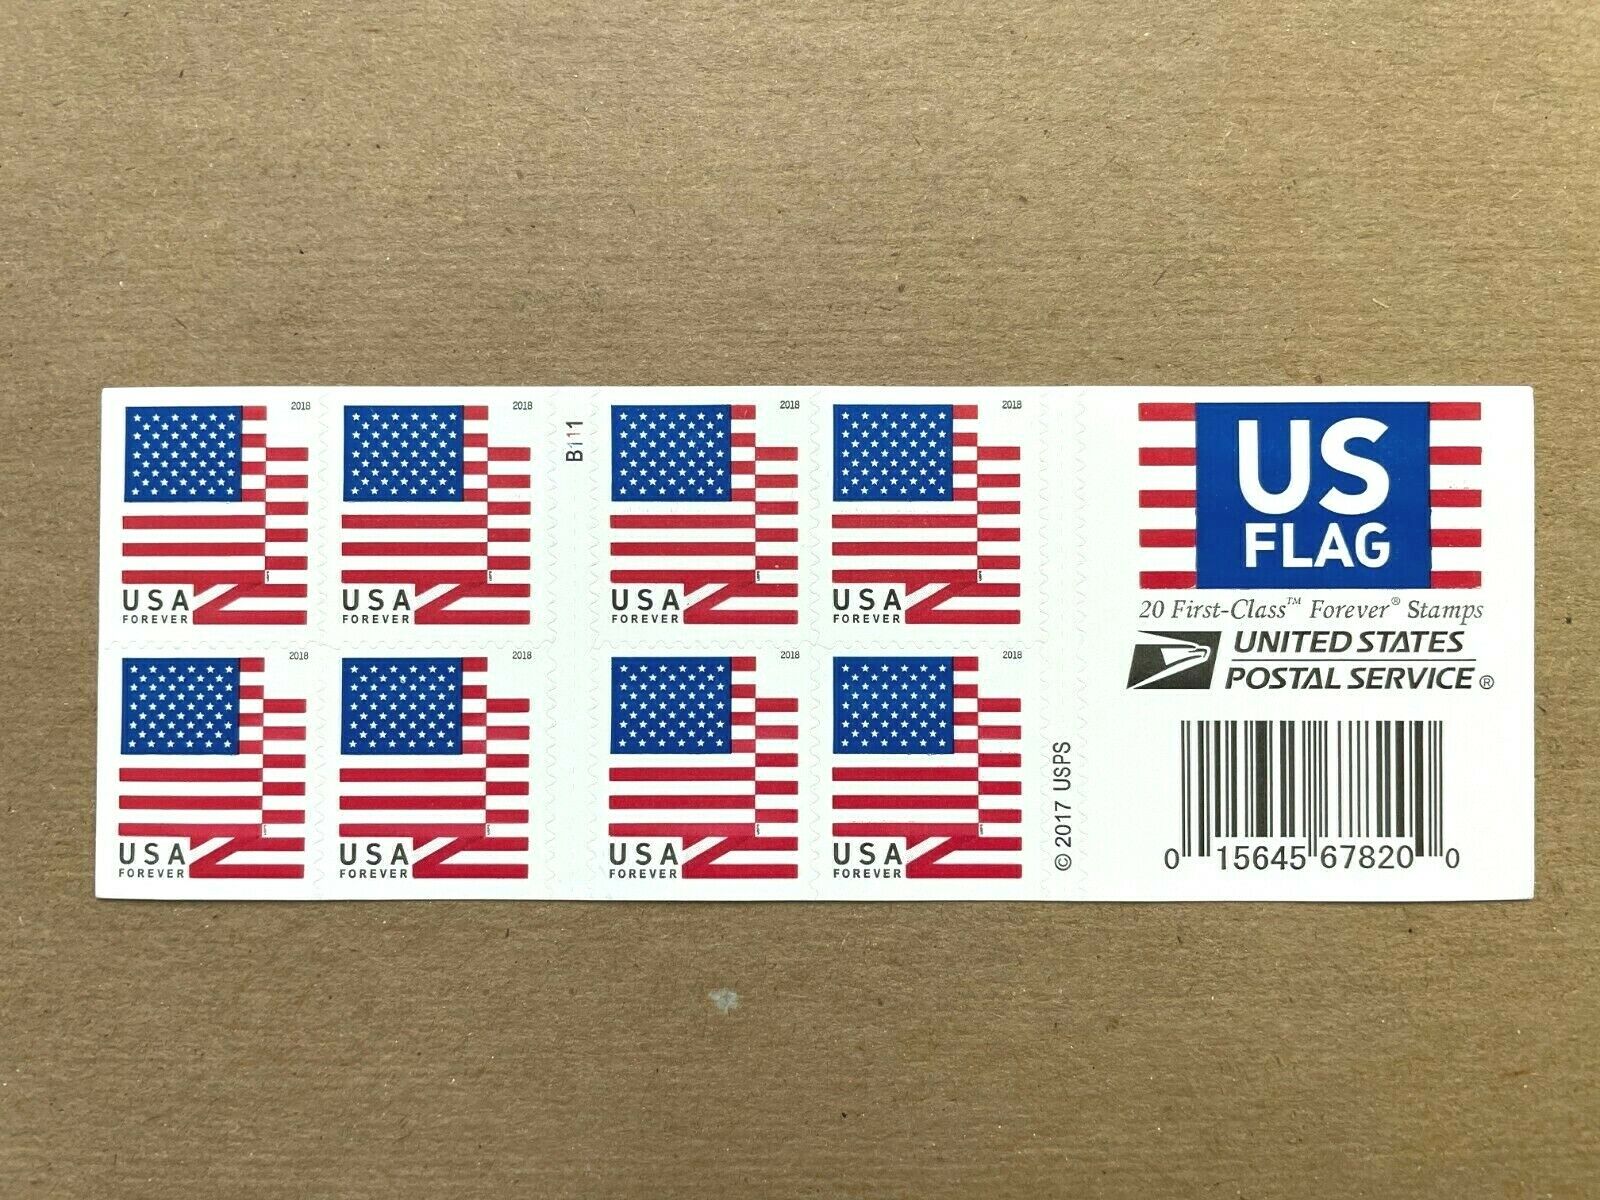 New (20) Usps Forever Stamps - Postage For First Class Mail